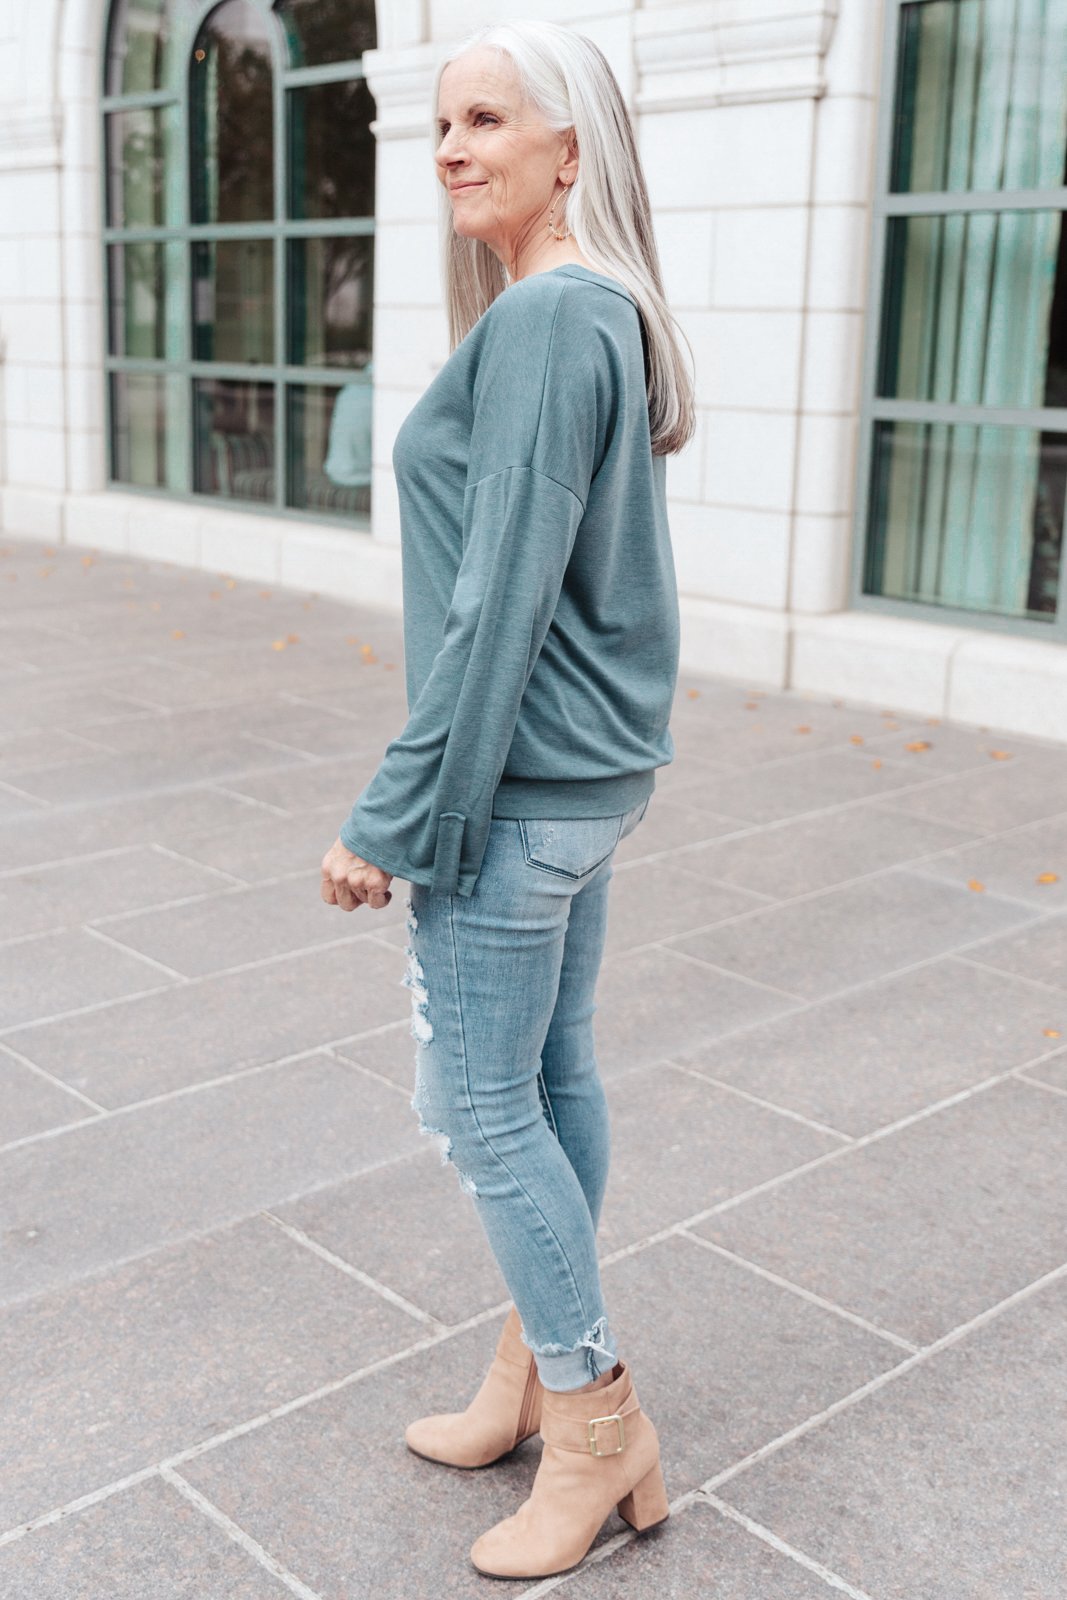 Throw On And Go Top in Teal (Online Exclusive)